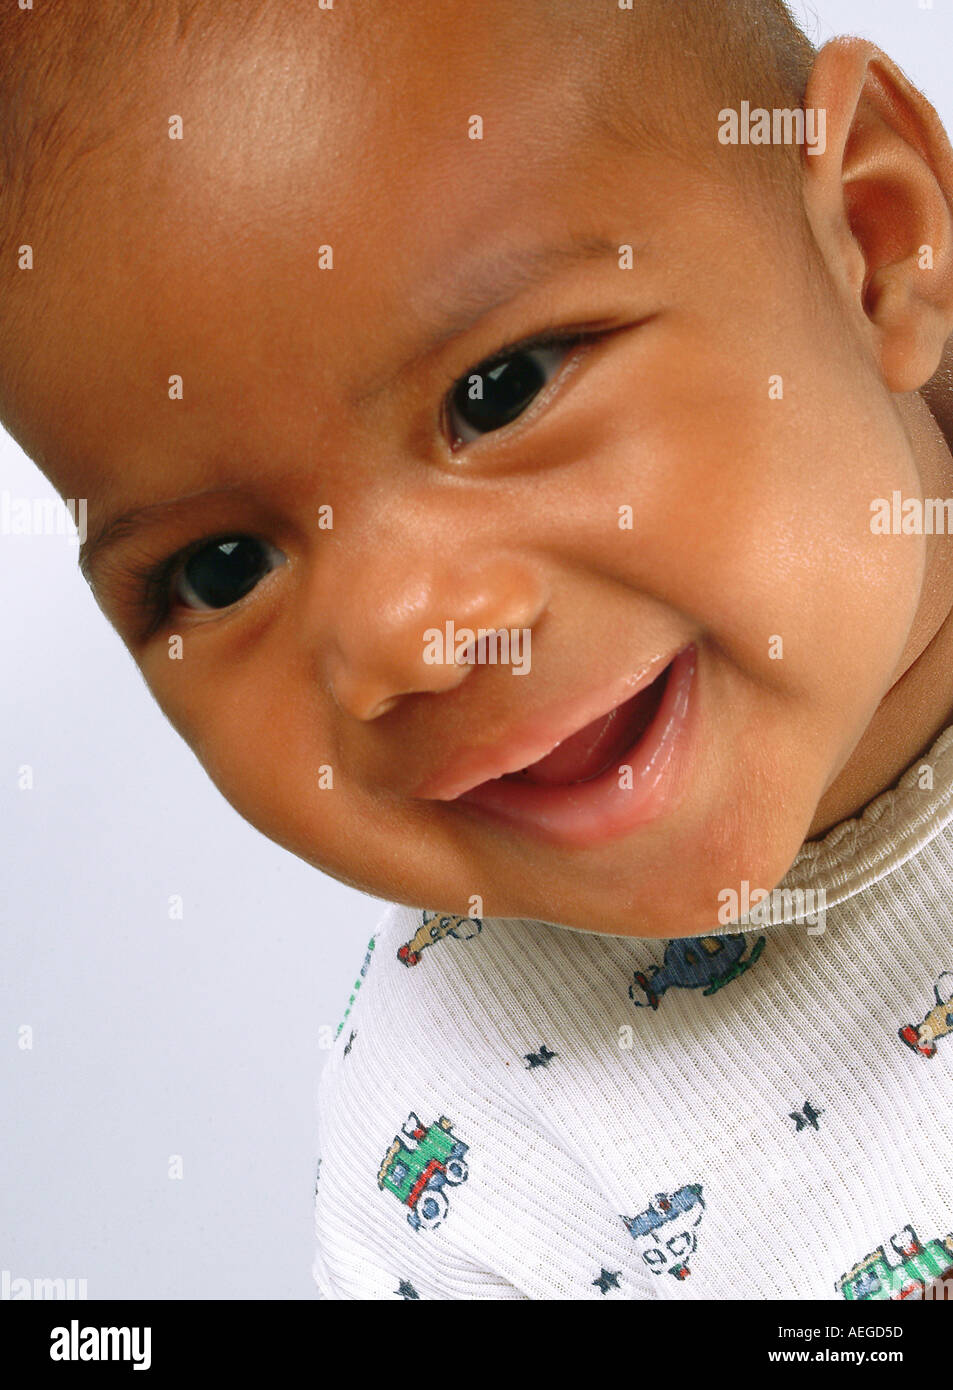 black chubby cute staring cheeky smile big closeup close up close up smiling happy happiness expression emotion person people ki Stock Photo